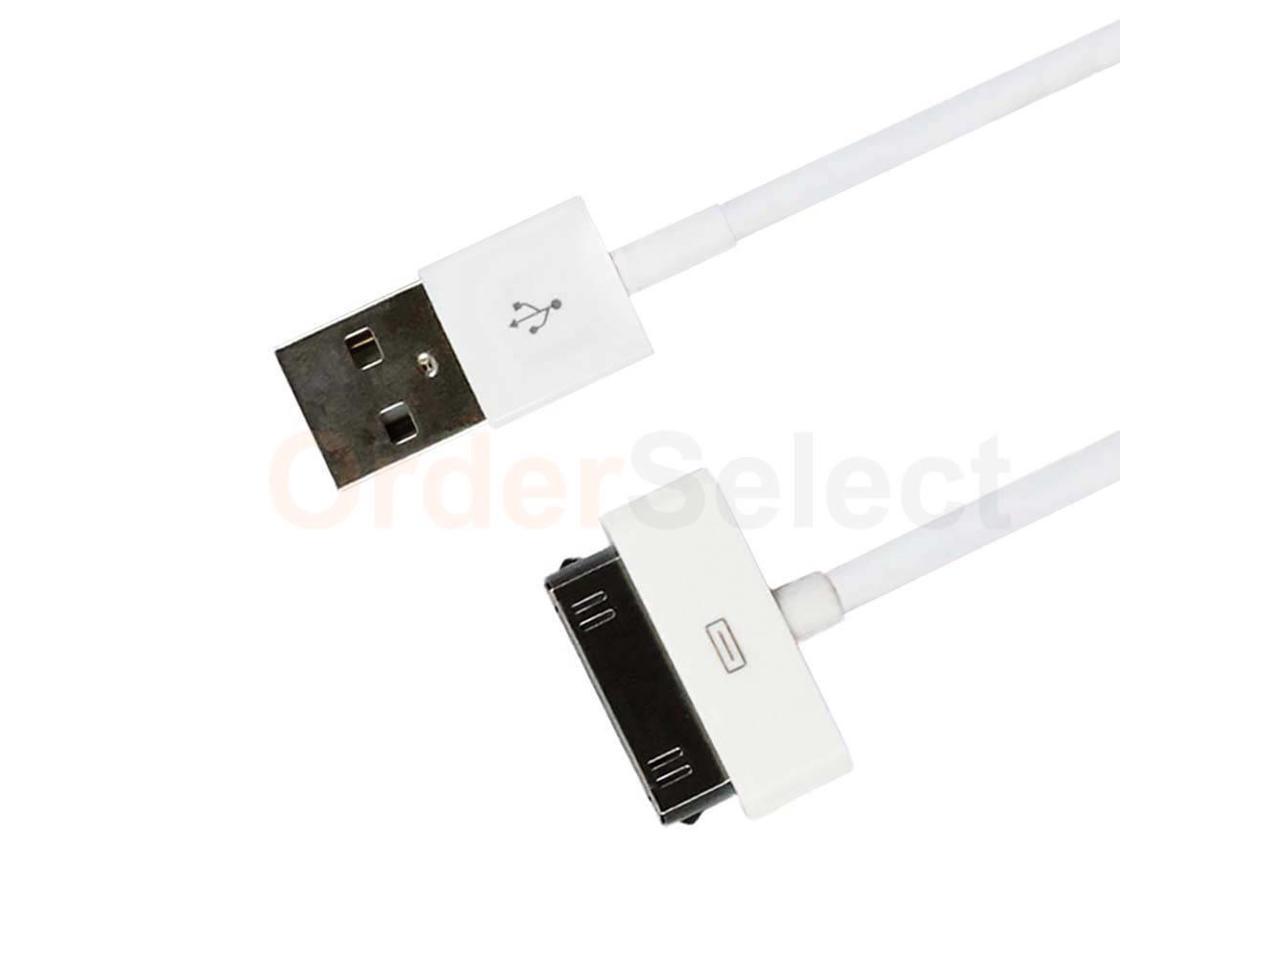 3 USB Fenzer Charger Cable for Tablet Apple iPad 1 2 3 1st 2nd 3rd GEN 100+SOLD 